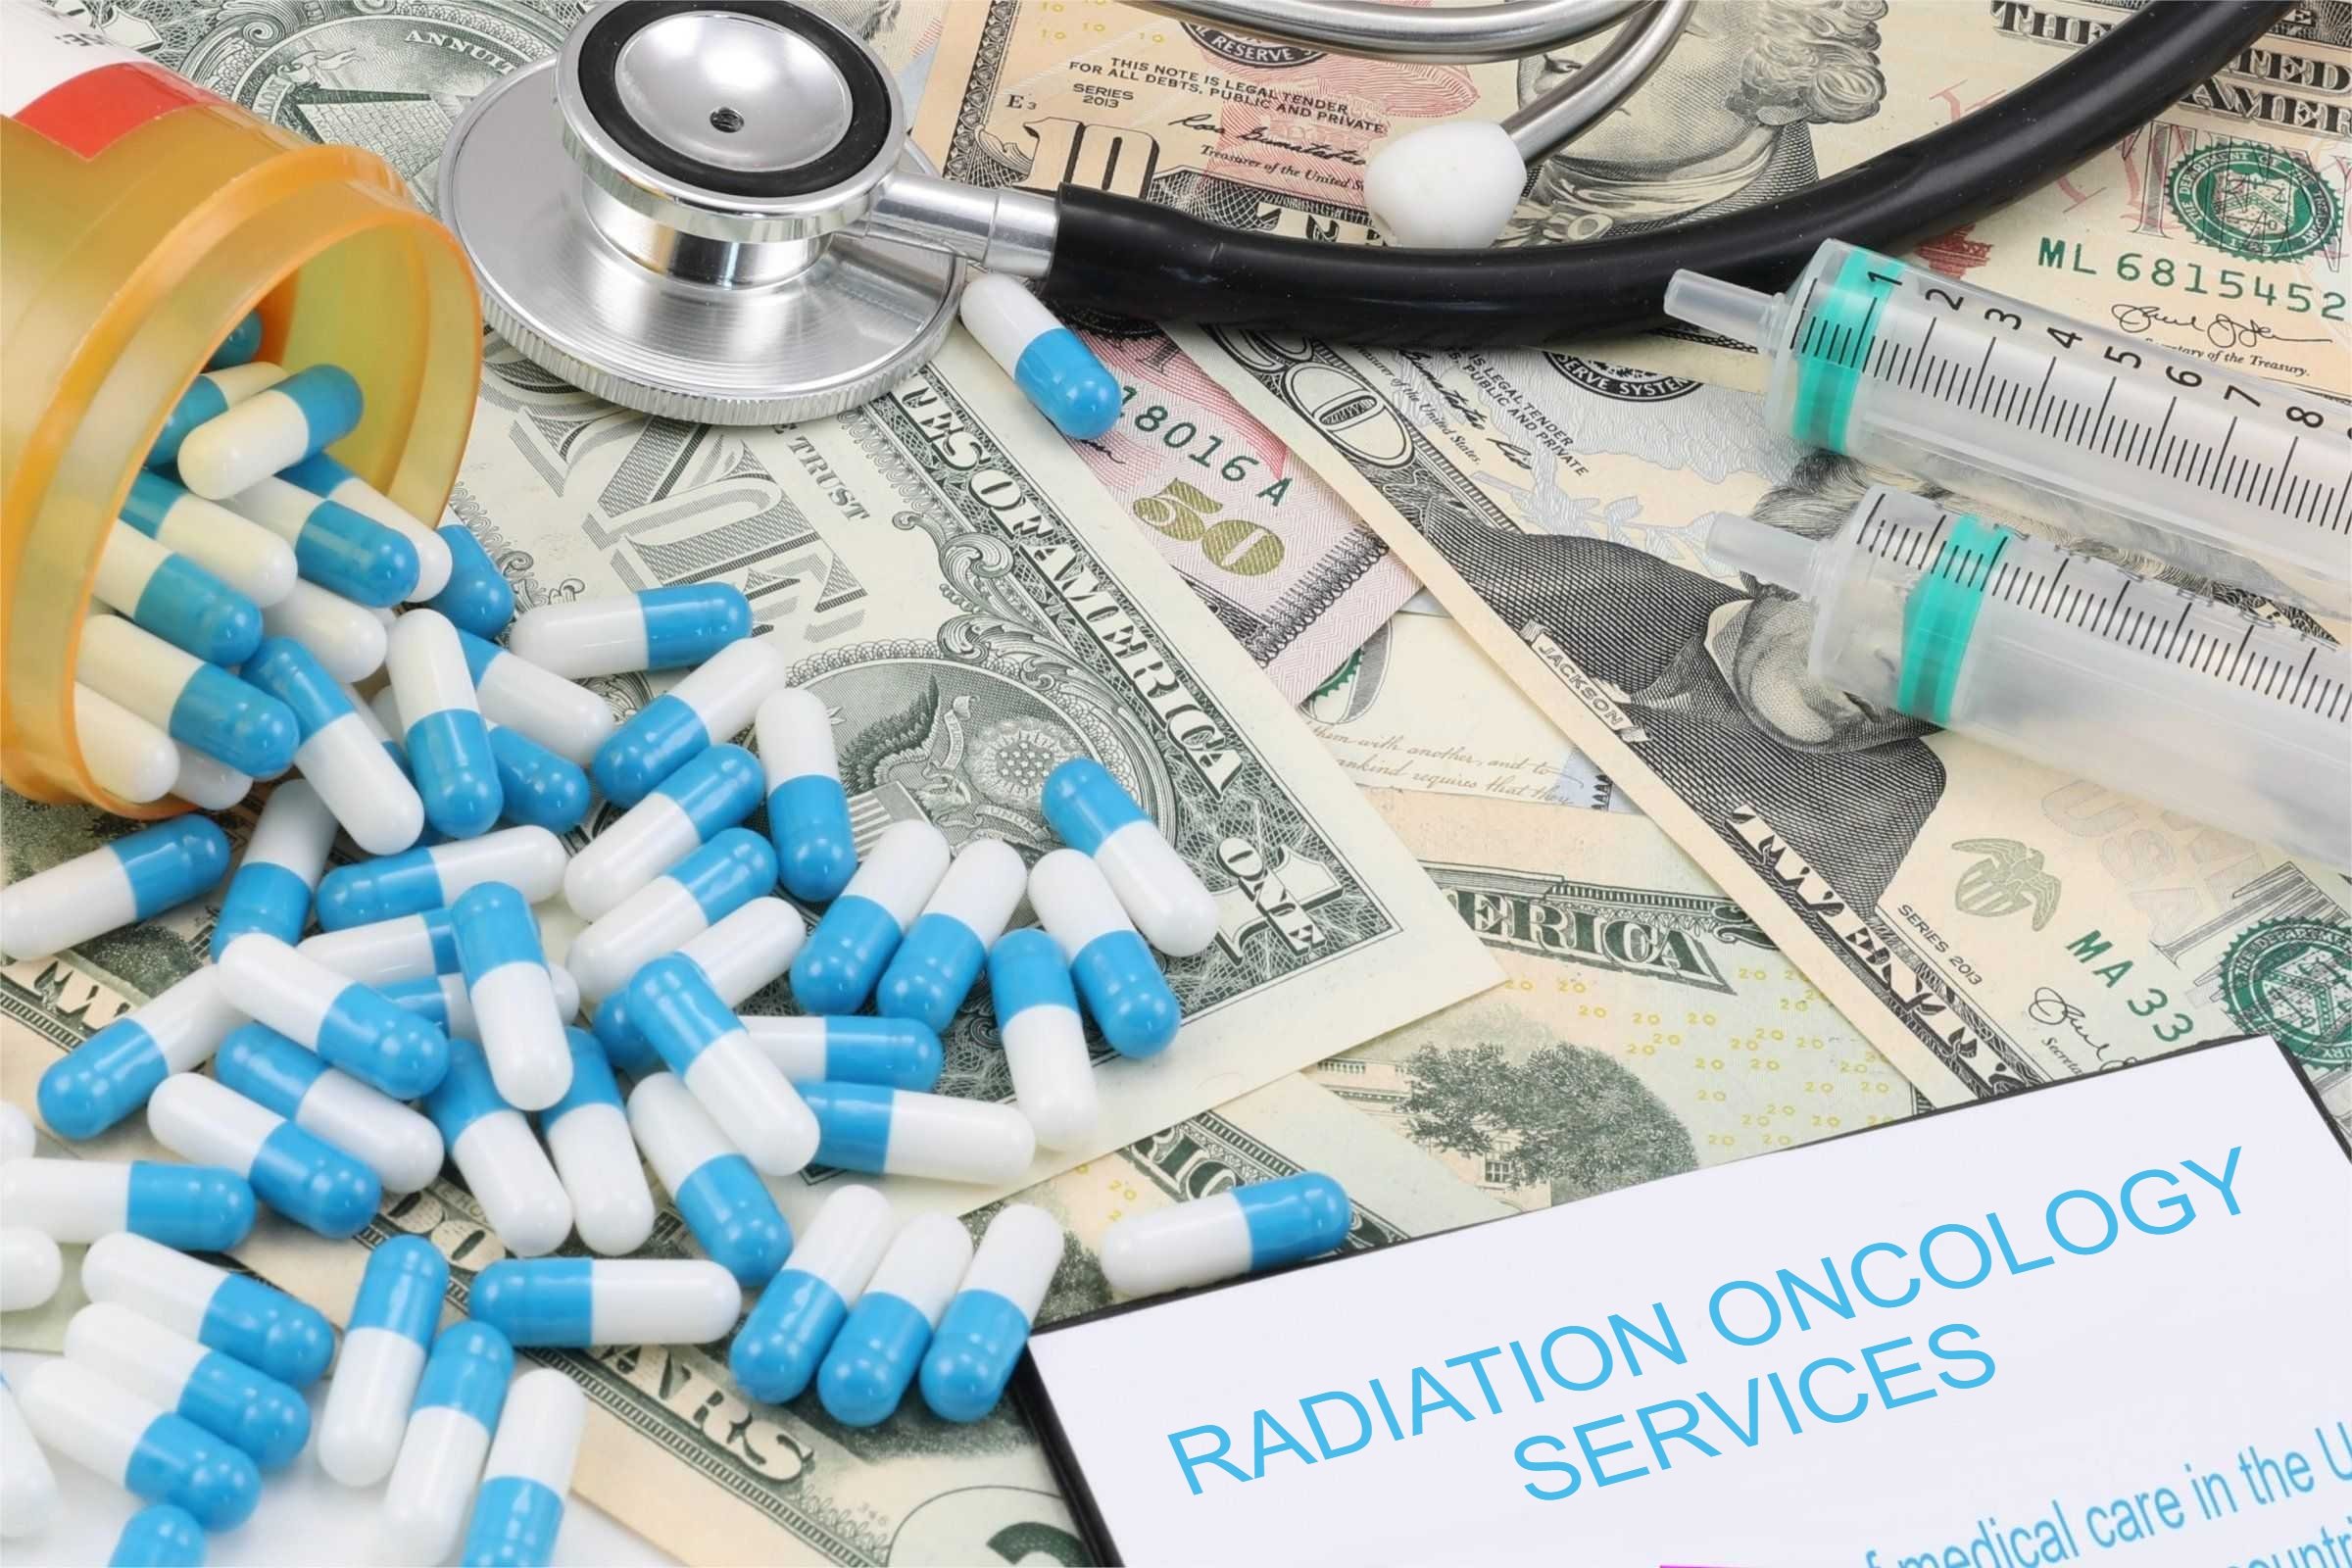 radiation oncology services